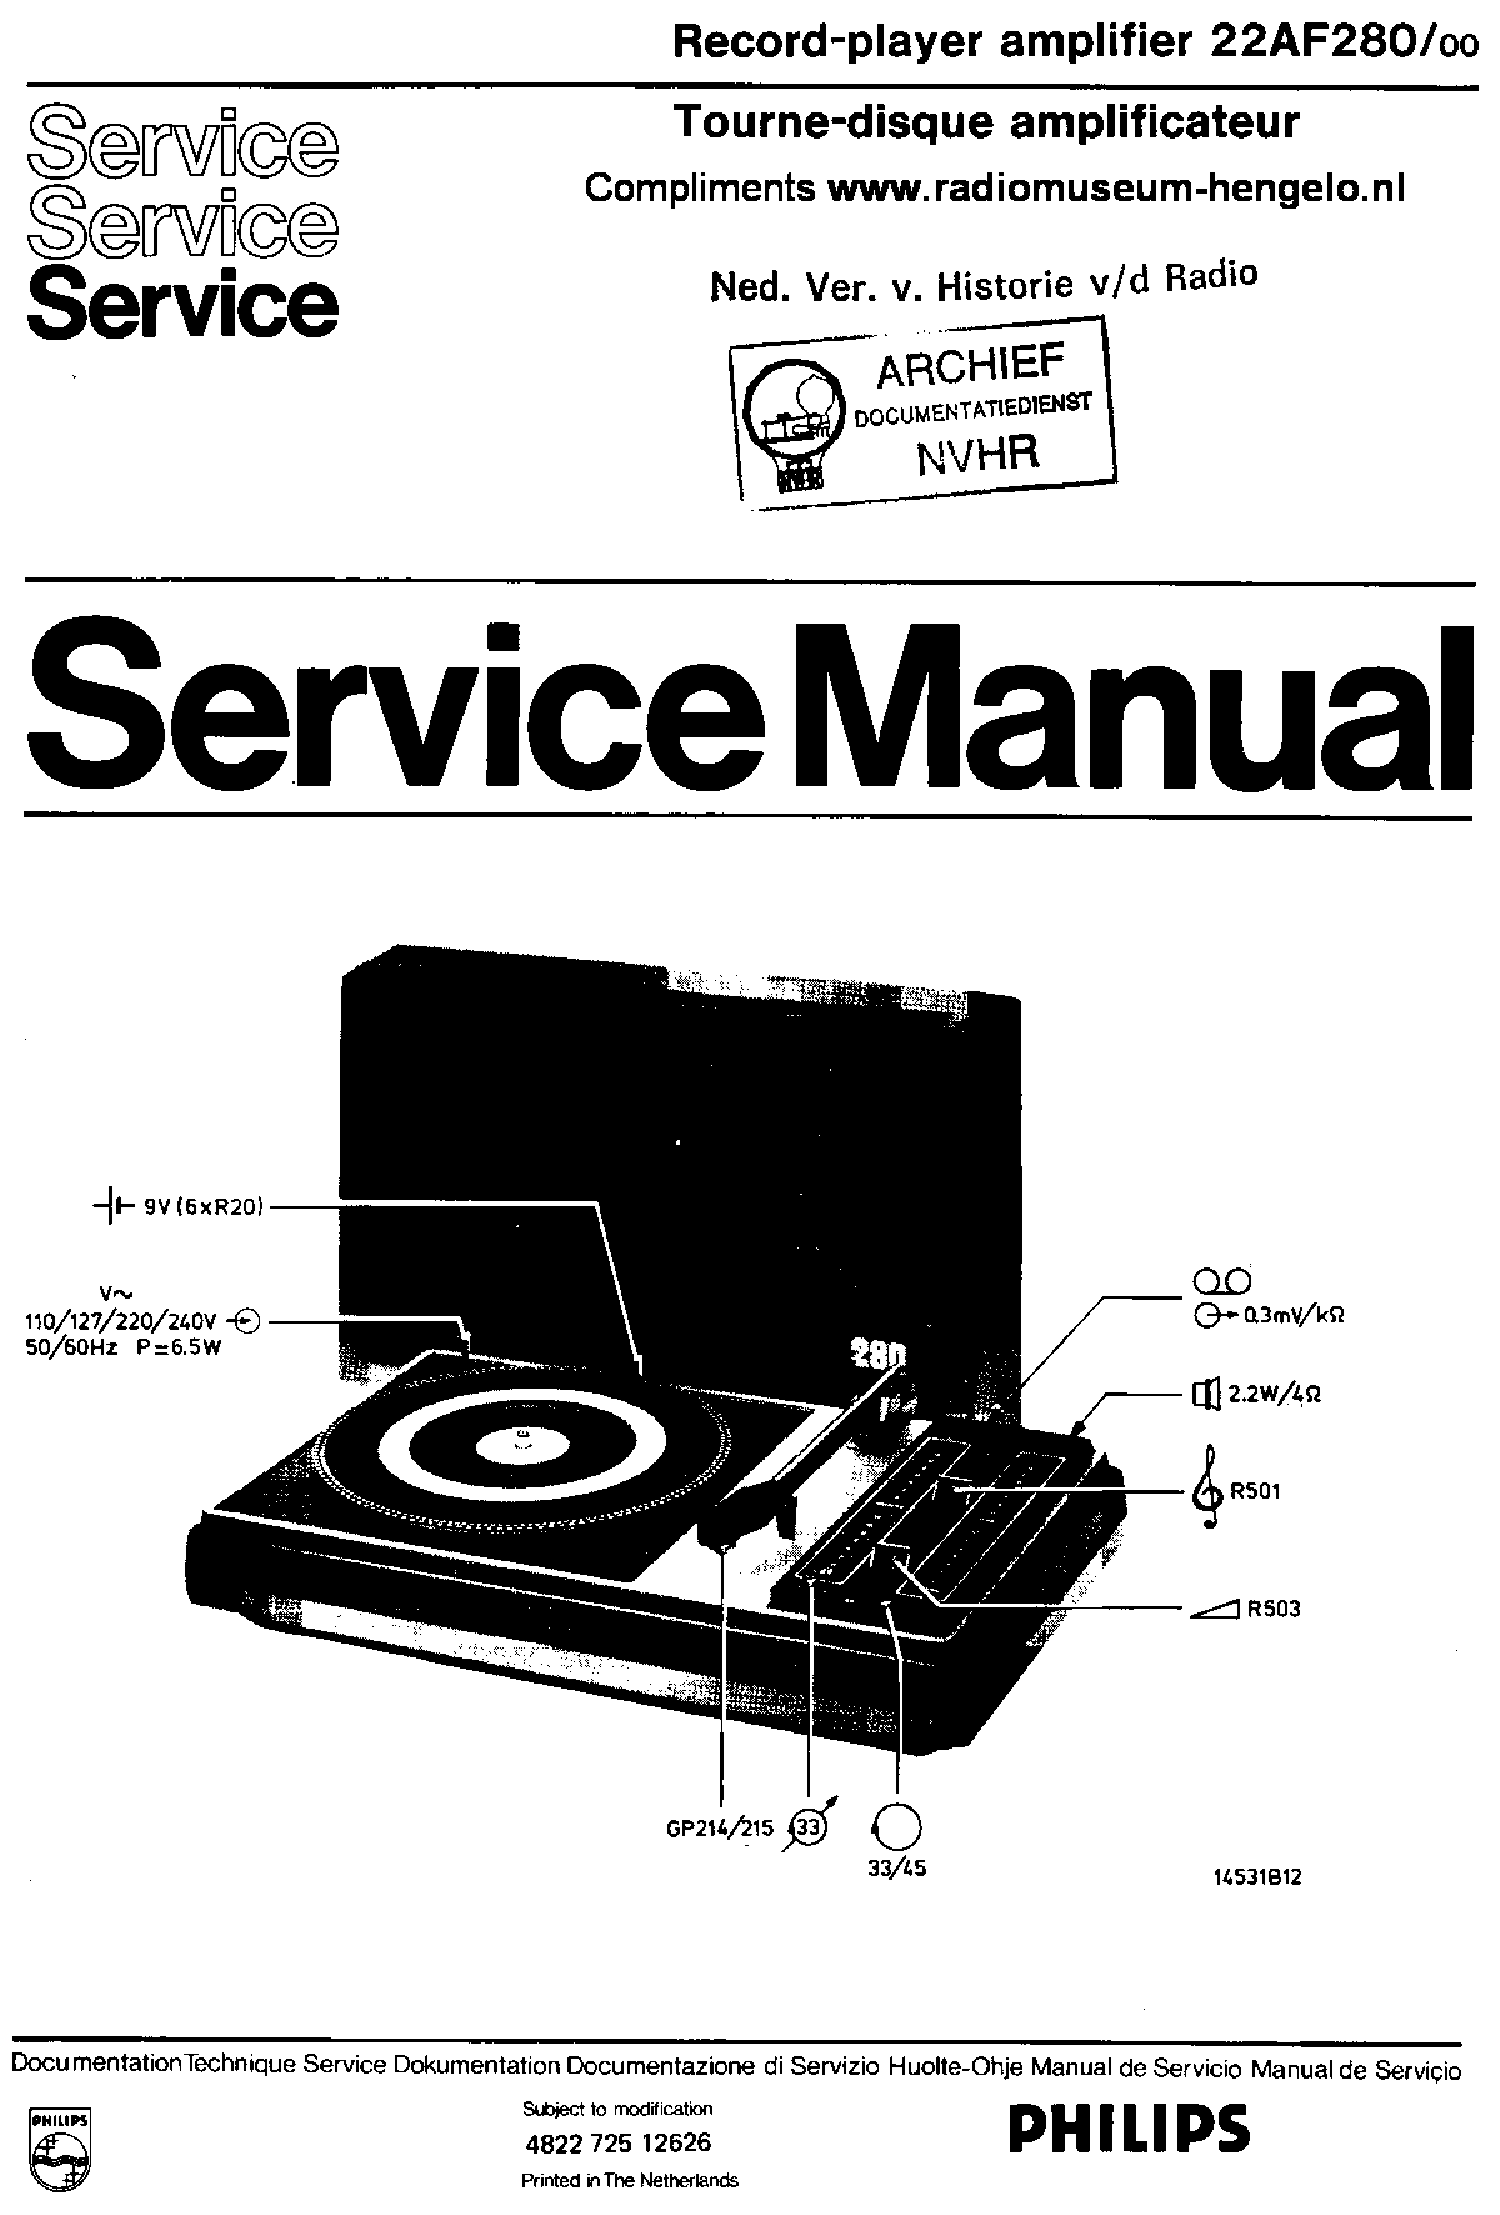 PHILIPS 22AF280-00 RECORD PLAYER AMPLIFIER SM service manual (1st page)